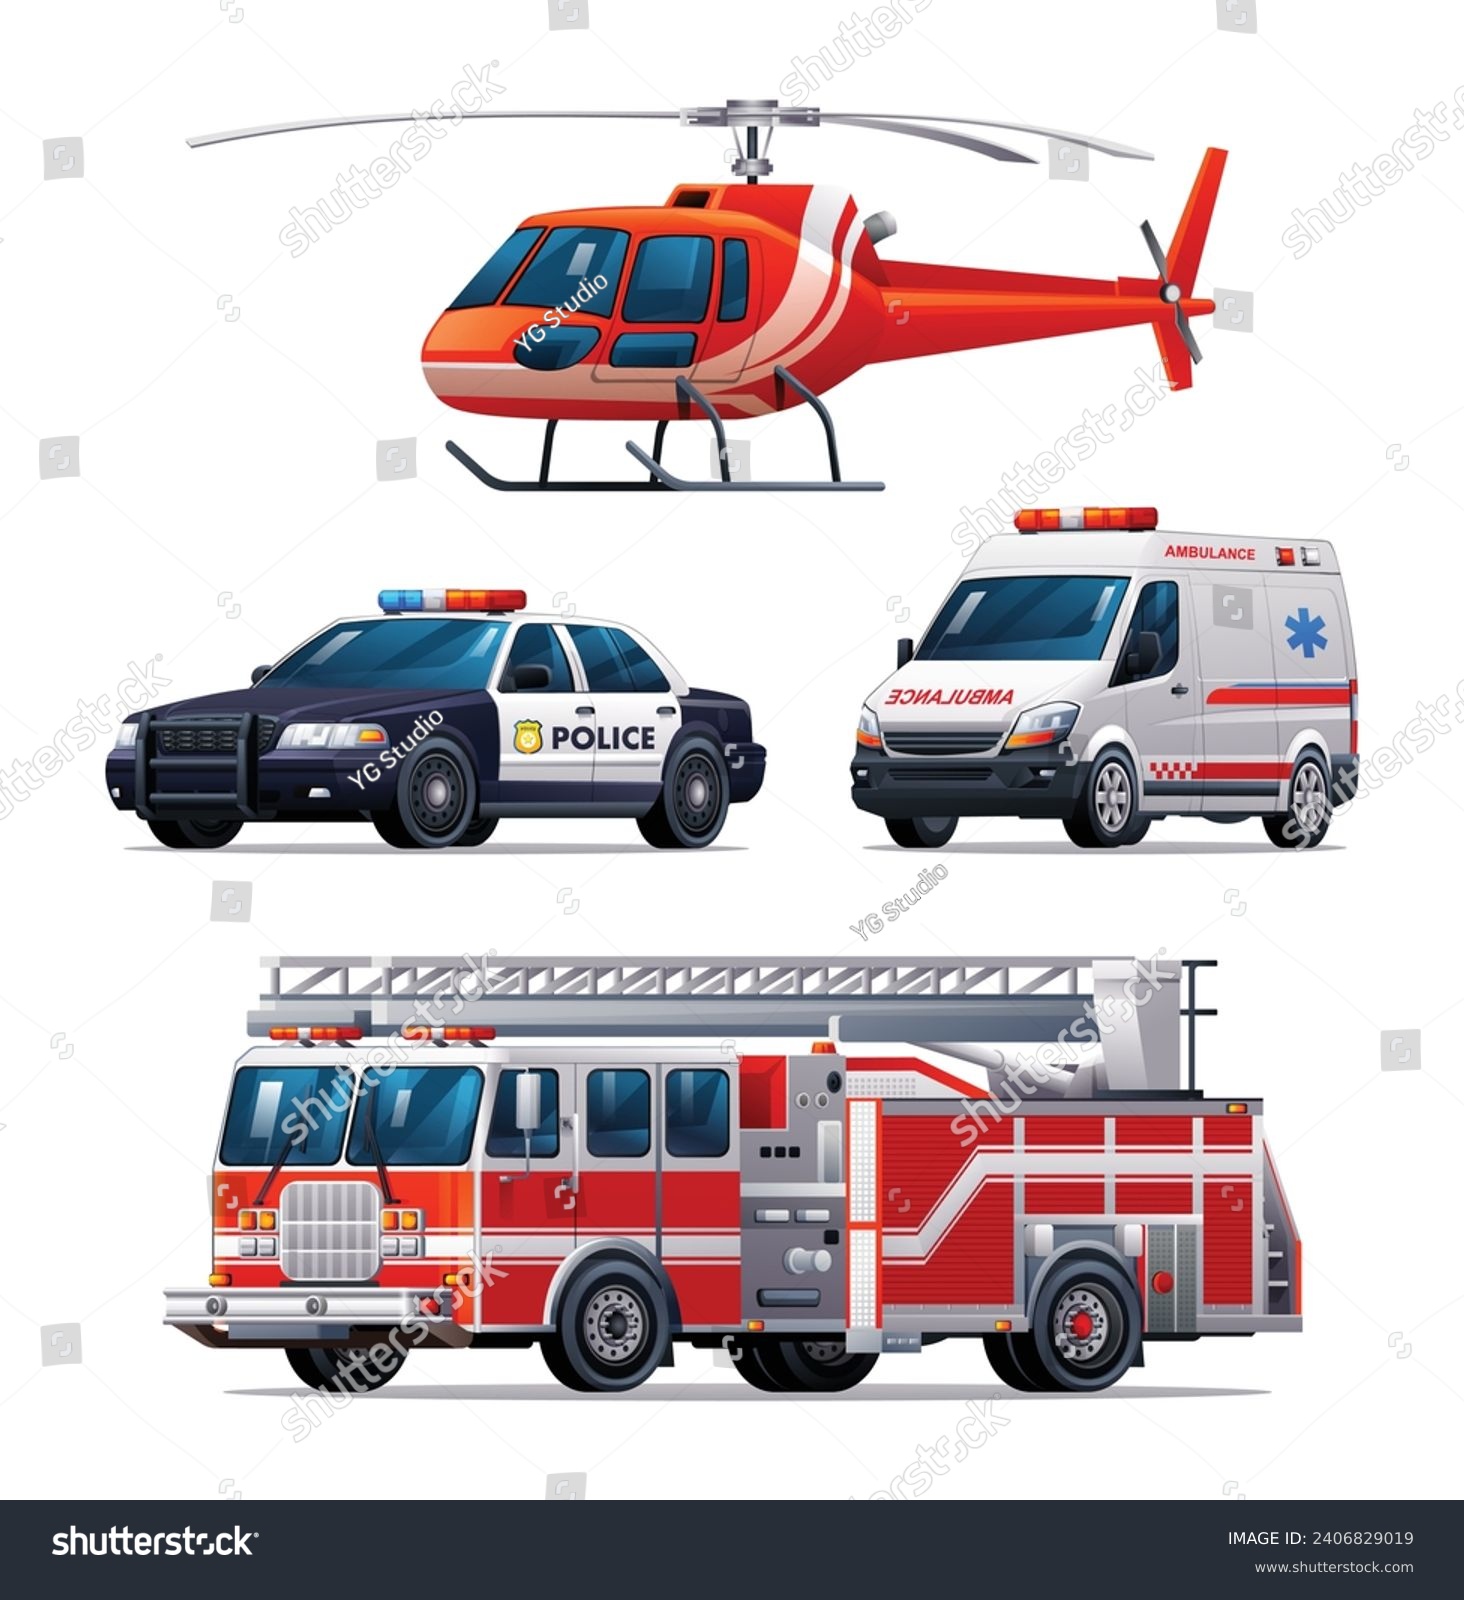 SVG of Set of emergency vehicles. Police car, ambulance, fire truck and helicopter. Official emergency service vehicles vector illustration svg